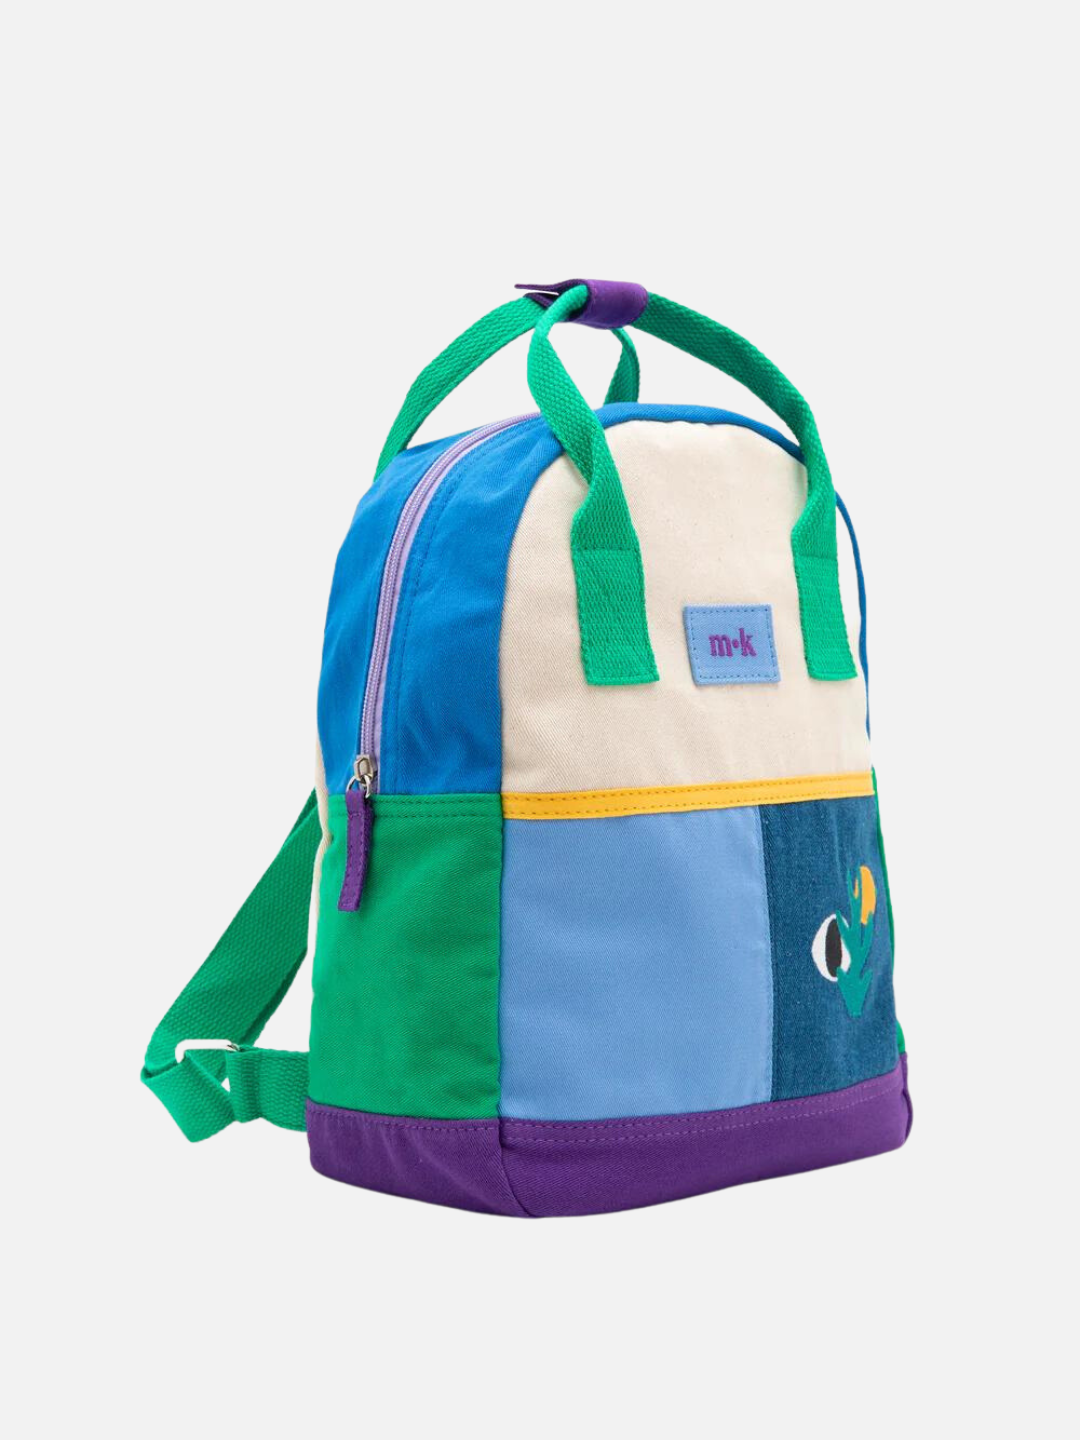 Banana Haven | Side view of a colorblock backpack with green handles, straps and side, purple base, blue top, with two blue patches at the front under a cream top, one with images of an eye, a sun and a plant